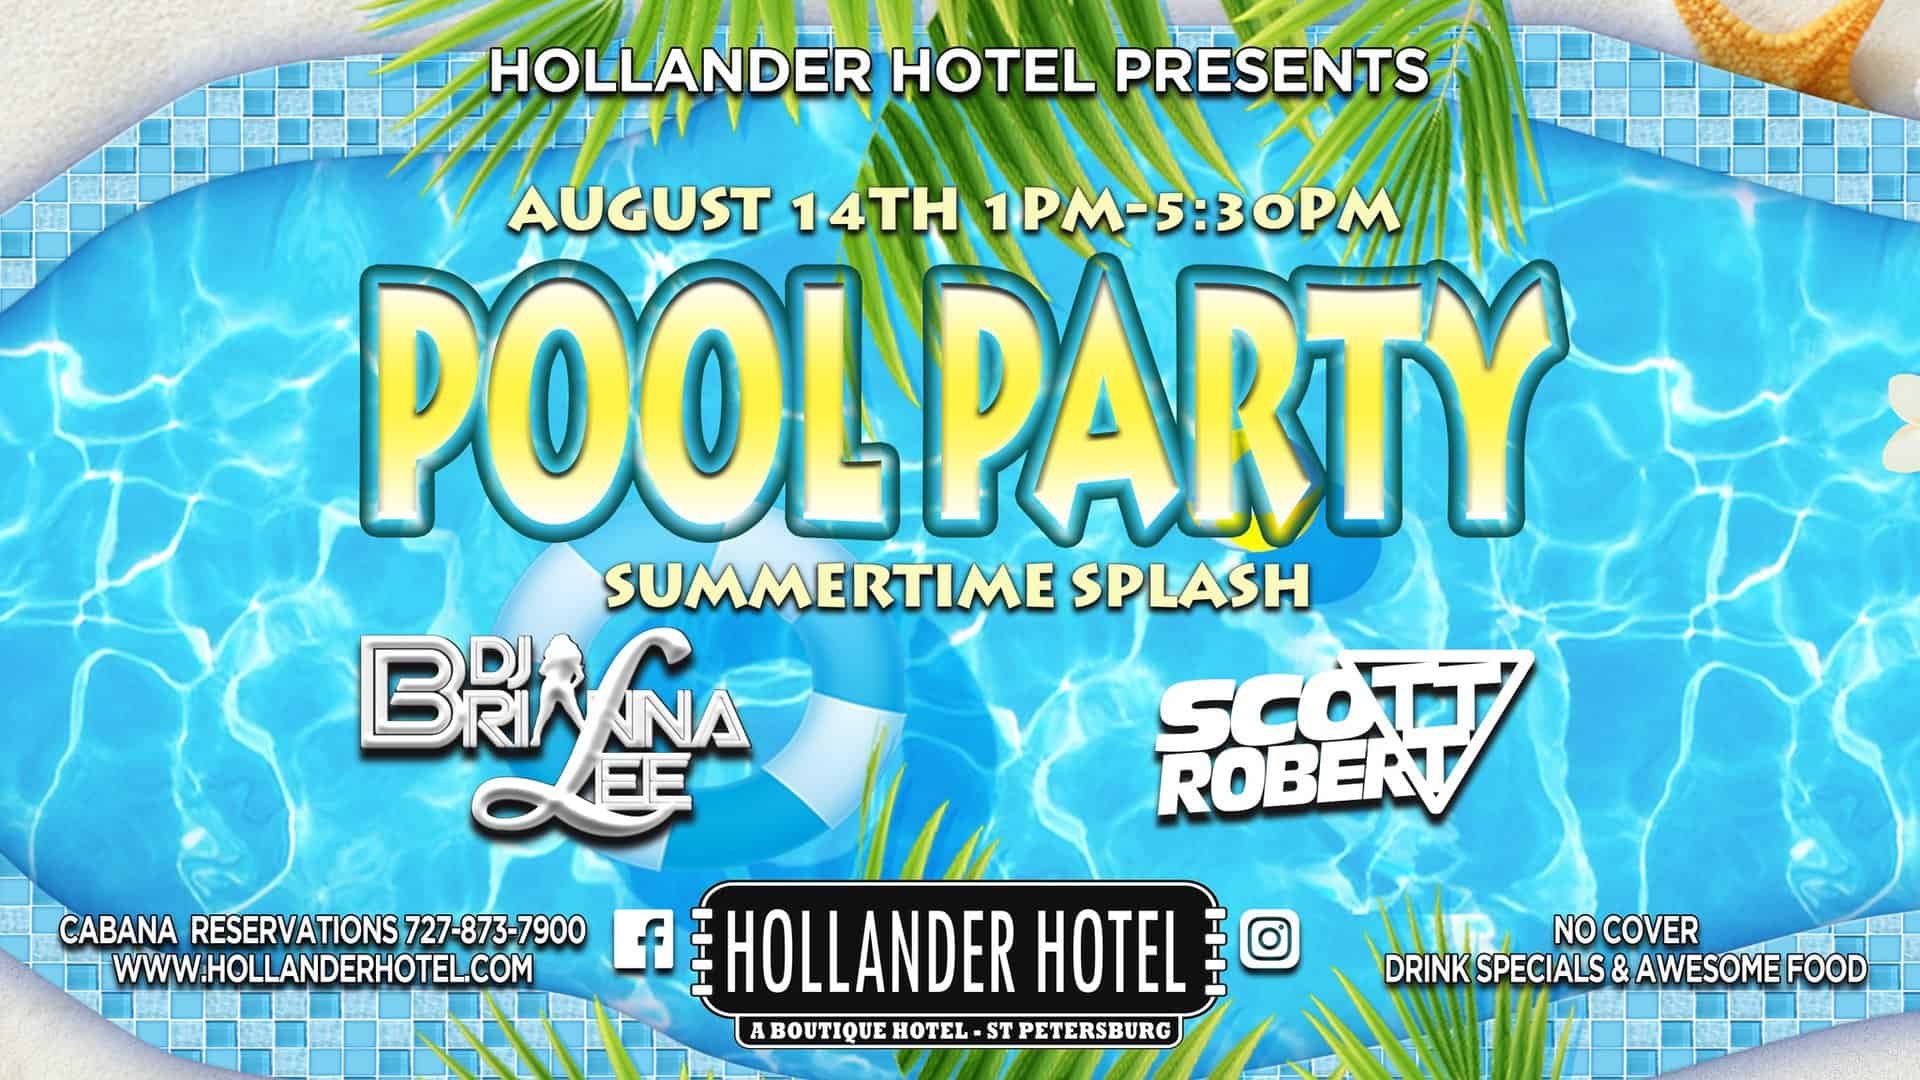 Pool Party at the Hollander Hotel August 14 1pm-5pm